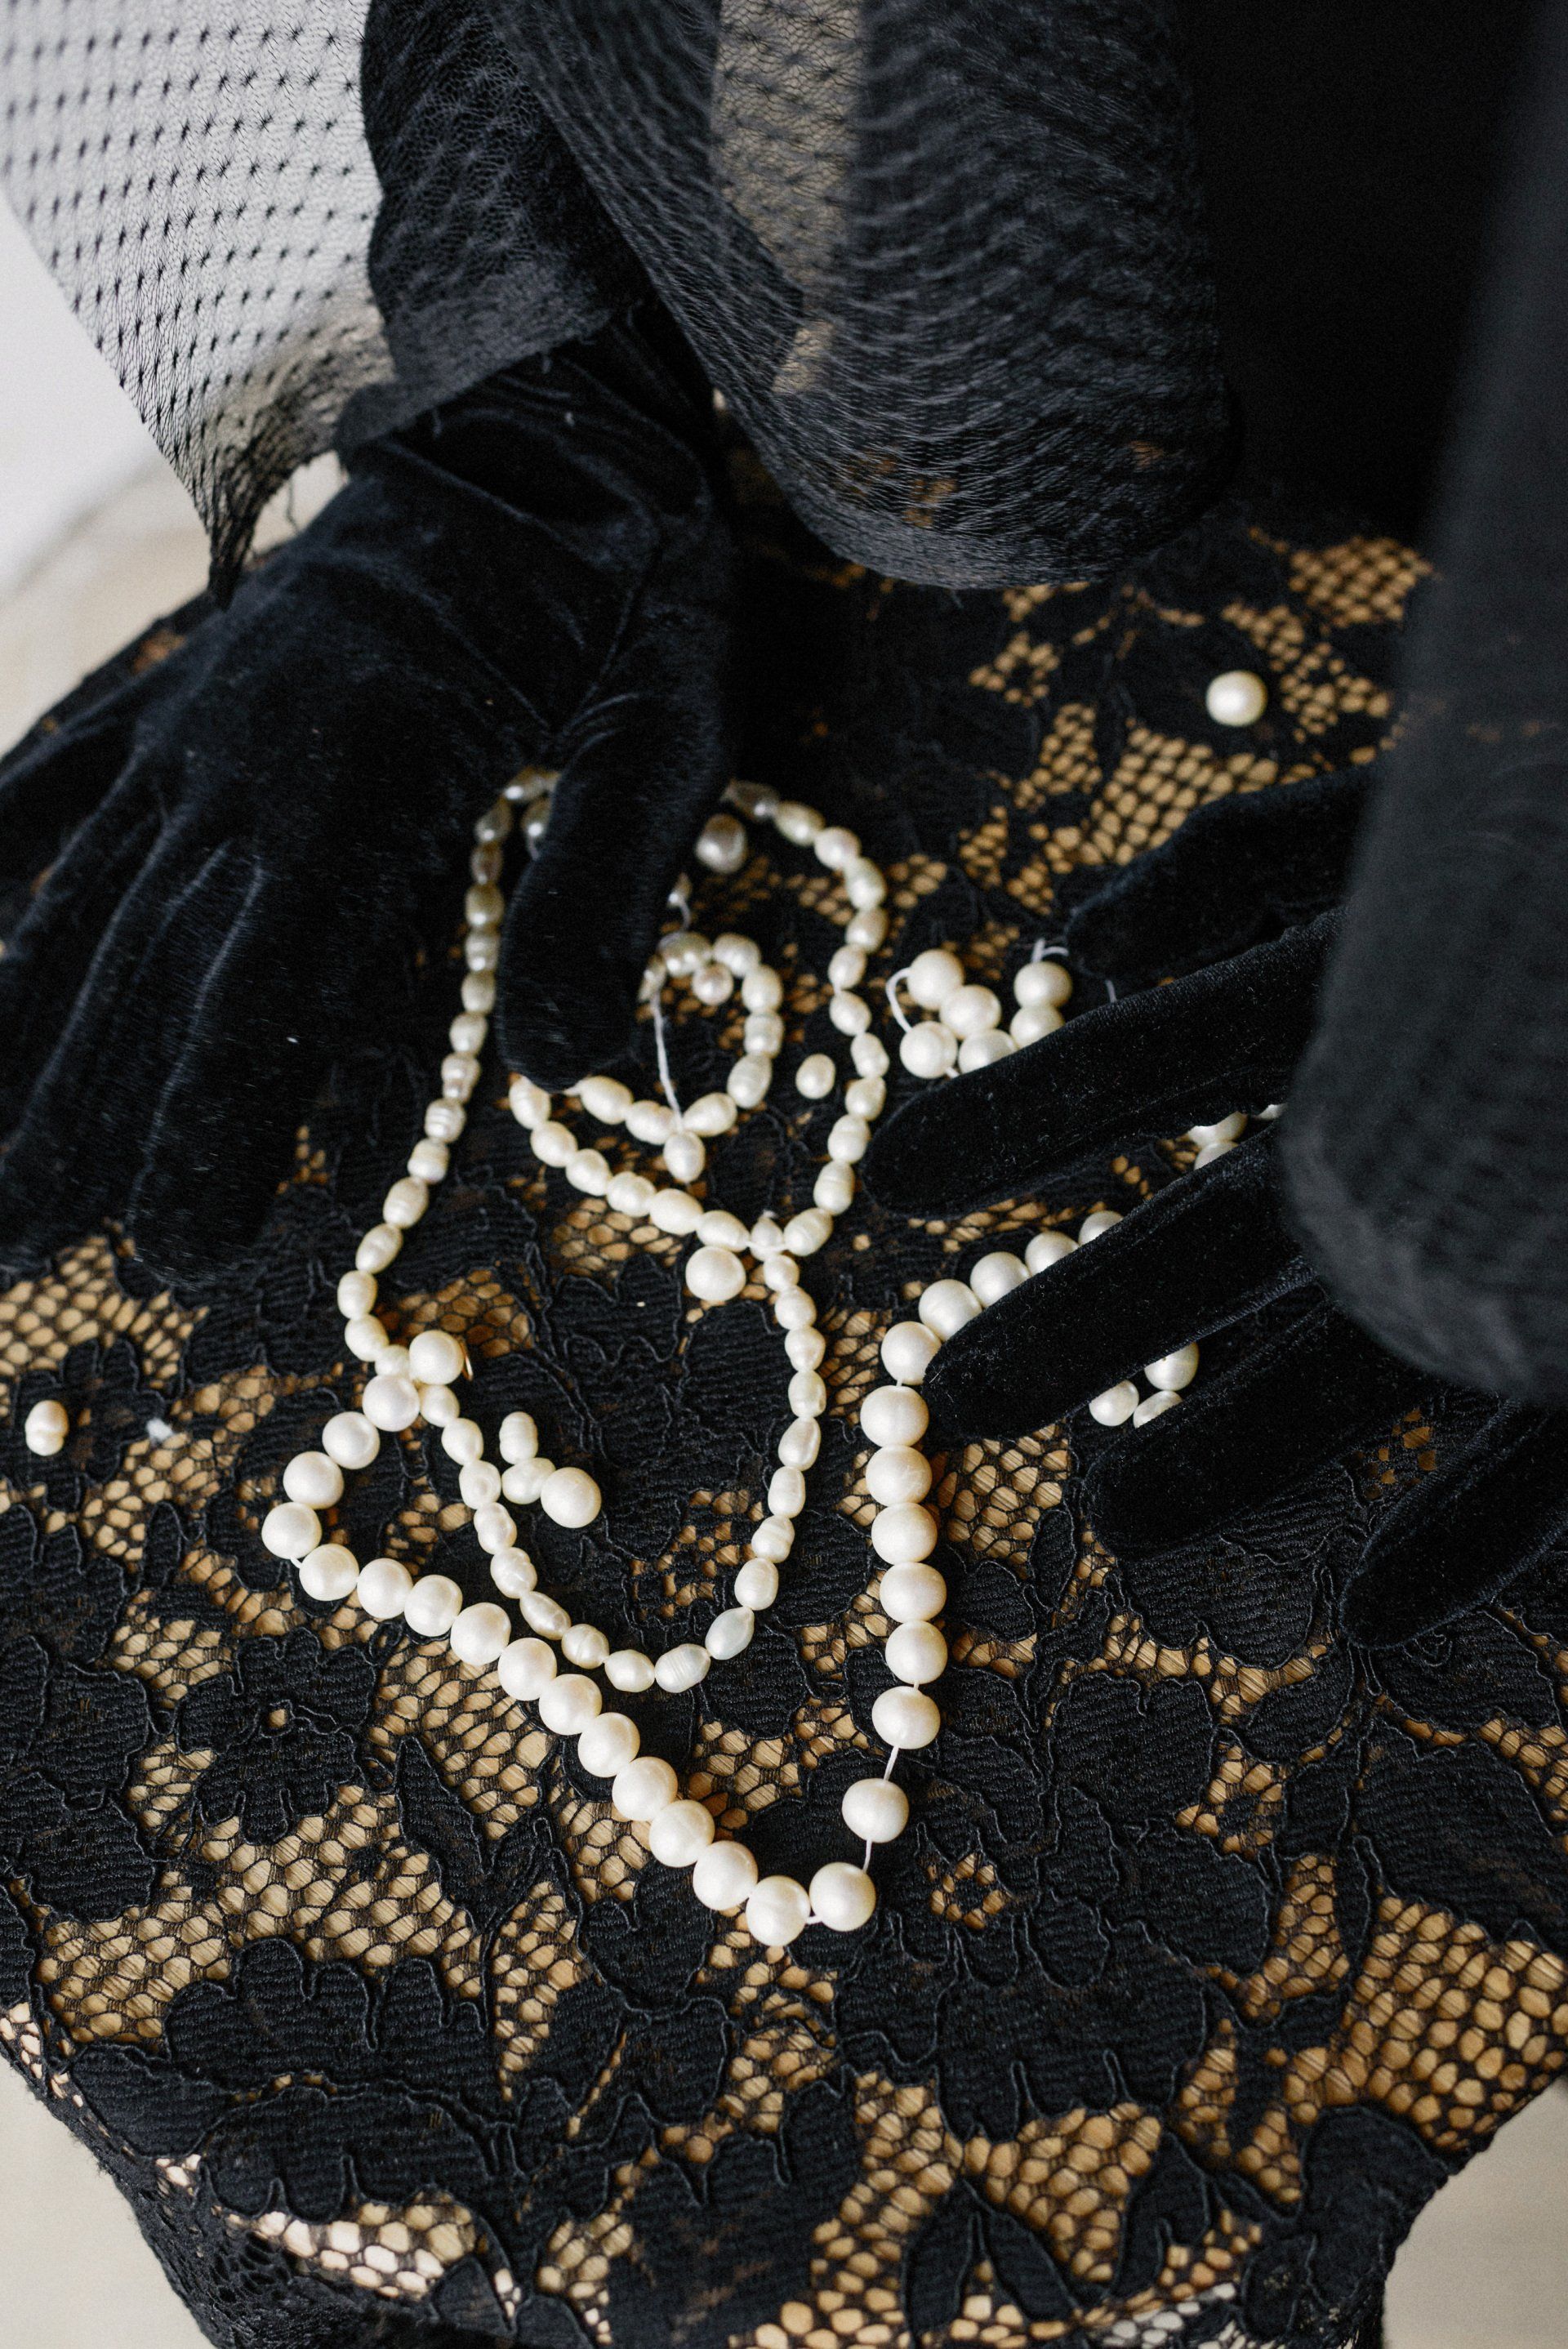 a pearl necklace and earrings are on a black lace cloth